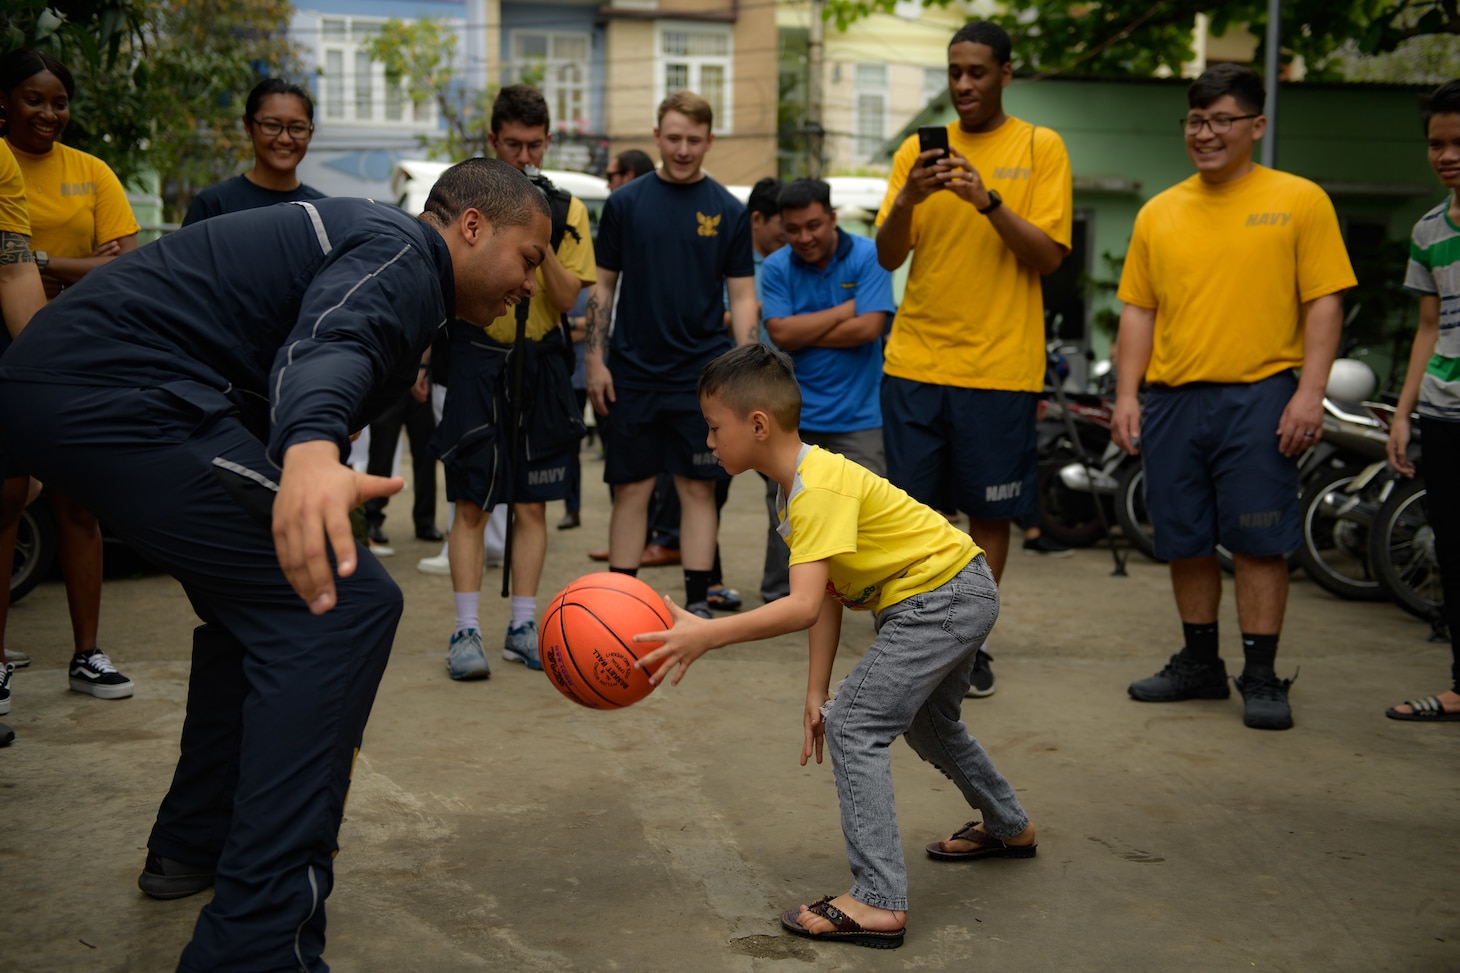 200306-N-YQ383-1567 VIETNAM (March 6, 2020) U.S. Navy Aviation Ordnanceman 3rd Class Khaden D. Vaughn, from Columbus, Ohio, plays basketball with a child at the Dorothea’s Project Legacies Charity Center, Da Nang, Vietnam, during a community relations project organized by the aircraft carrier USS Theodore Roosevelt (CVN 71) March 6, 2020. Theodore Roosevelt and the Ticonderoga-class guided-missile cruiser USS Bunker Hill (CG 52) are in Vietnam for a port visit during their scheduled deployment to the Indo-Pacific.